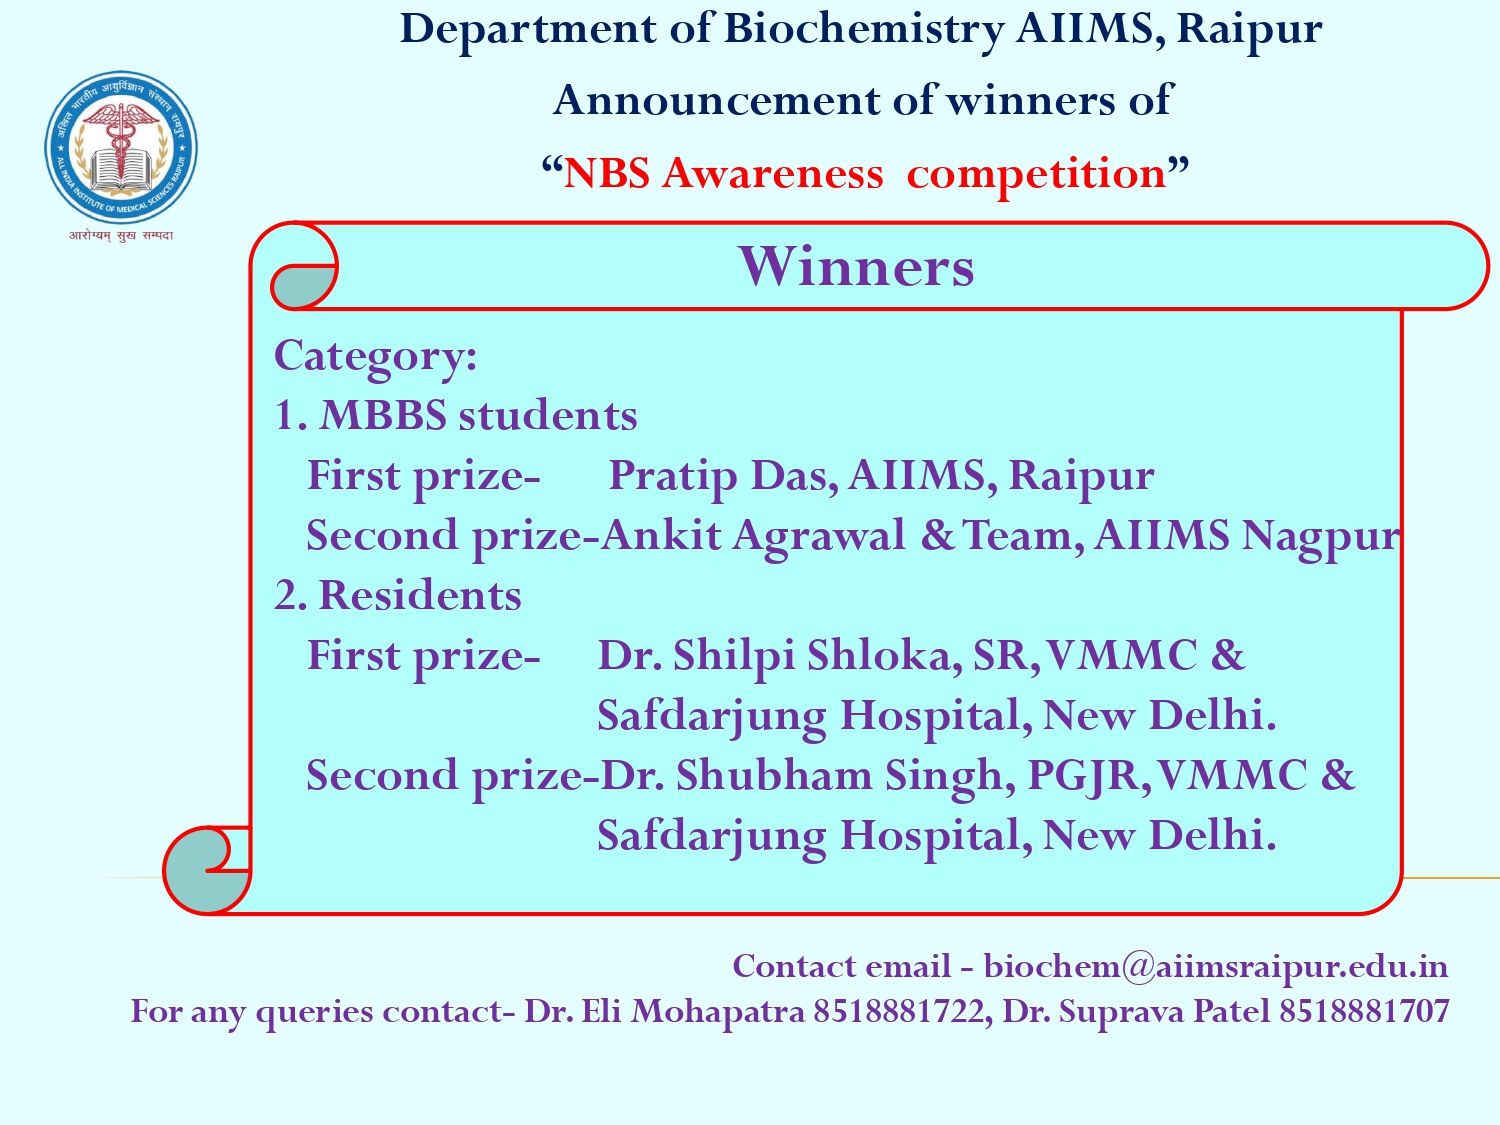 Publishing the winners of the NBS awareness competition conducted by Dept. of Biochemistry